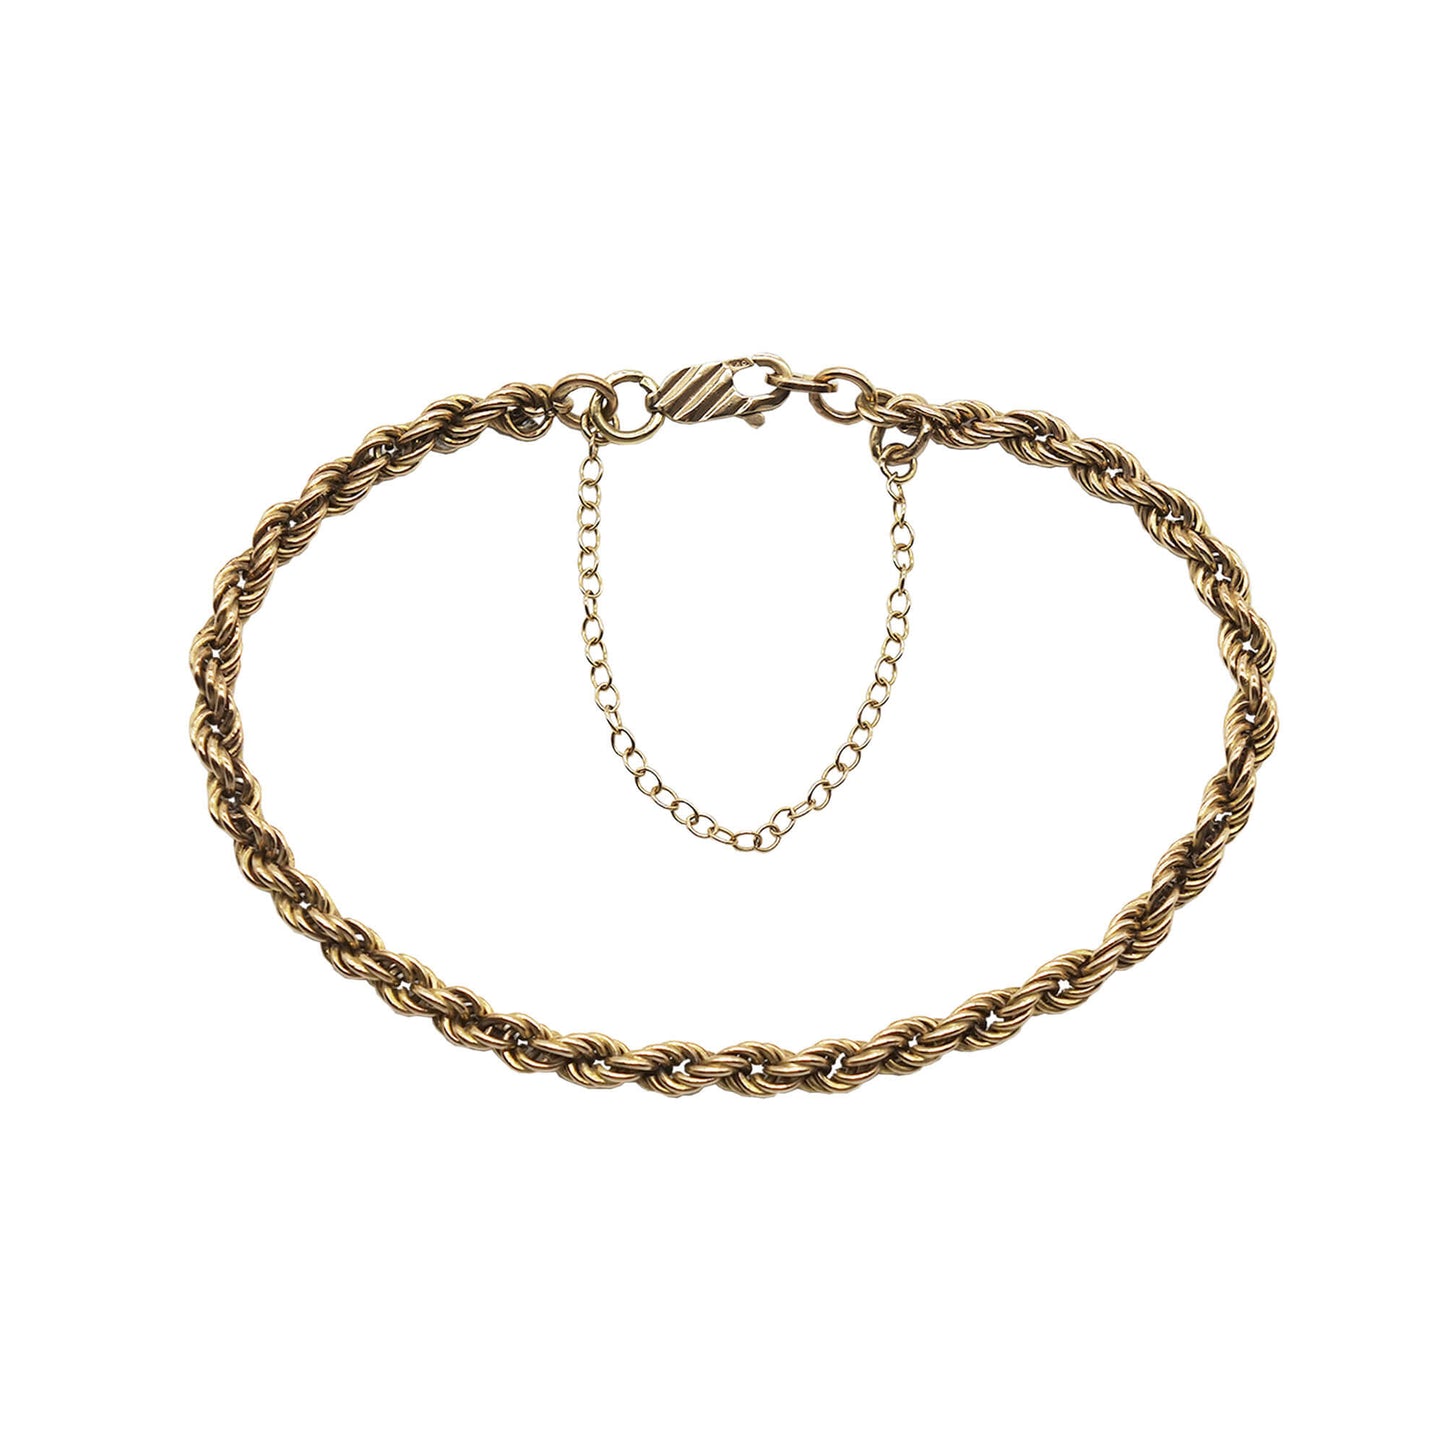 Vintage 9K gold rope chain bracelet with fine safety chain. 